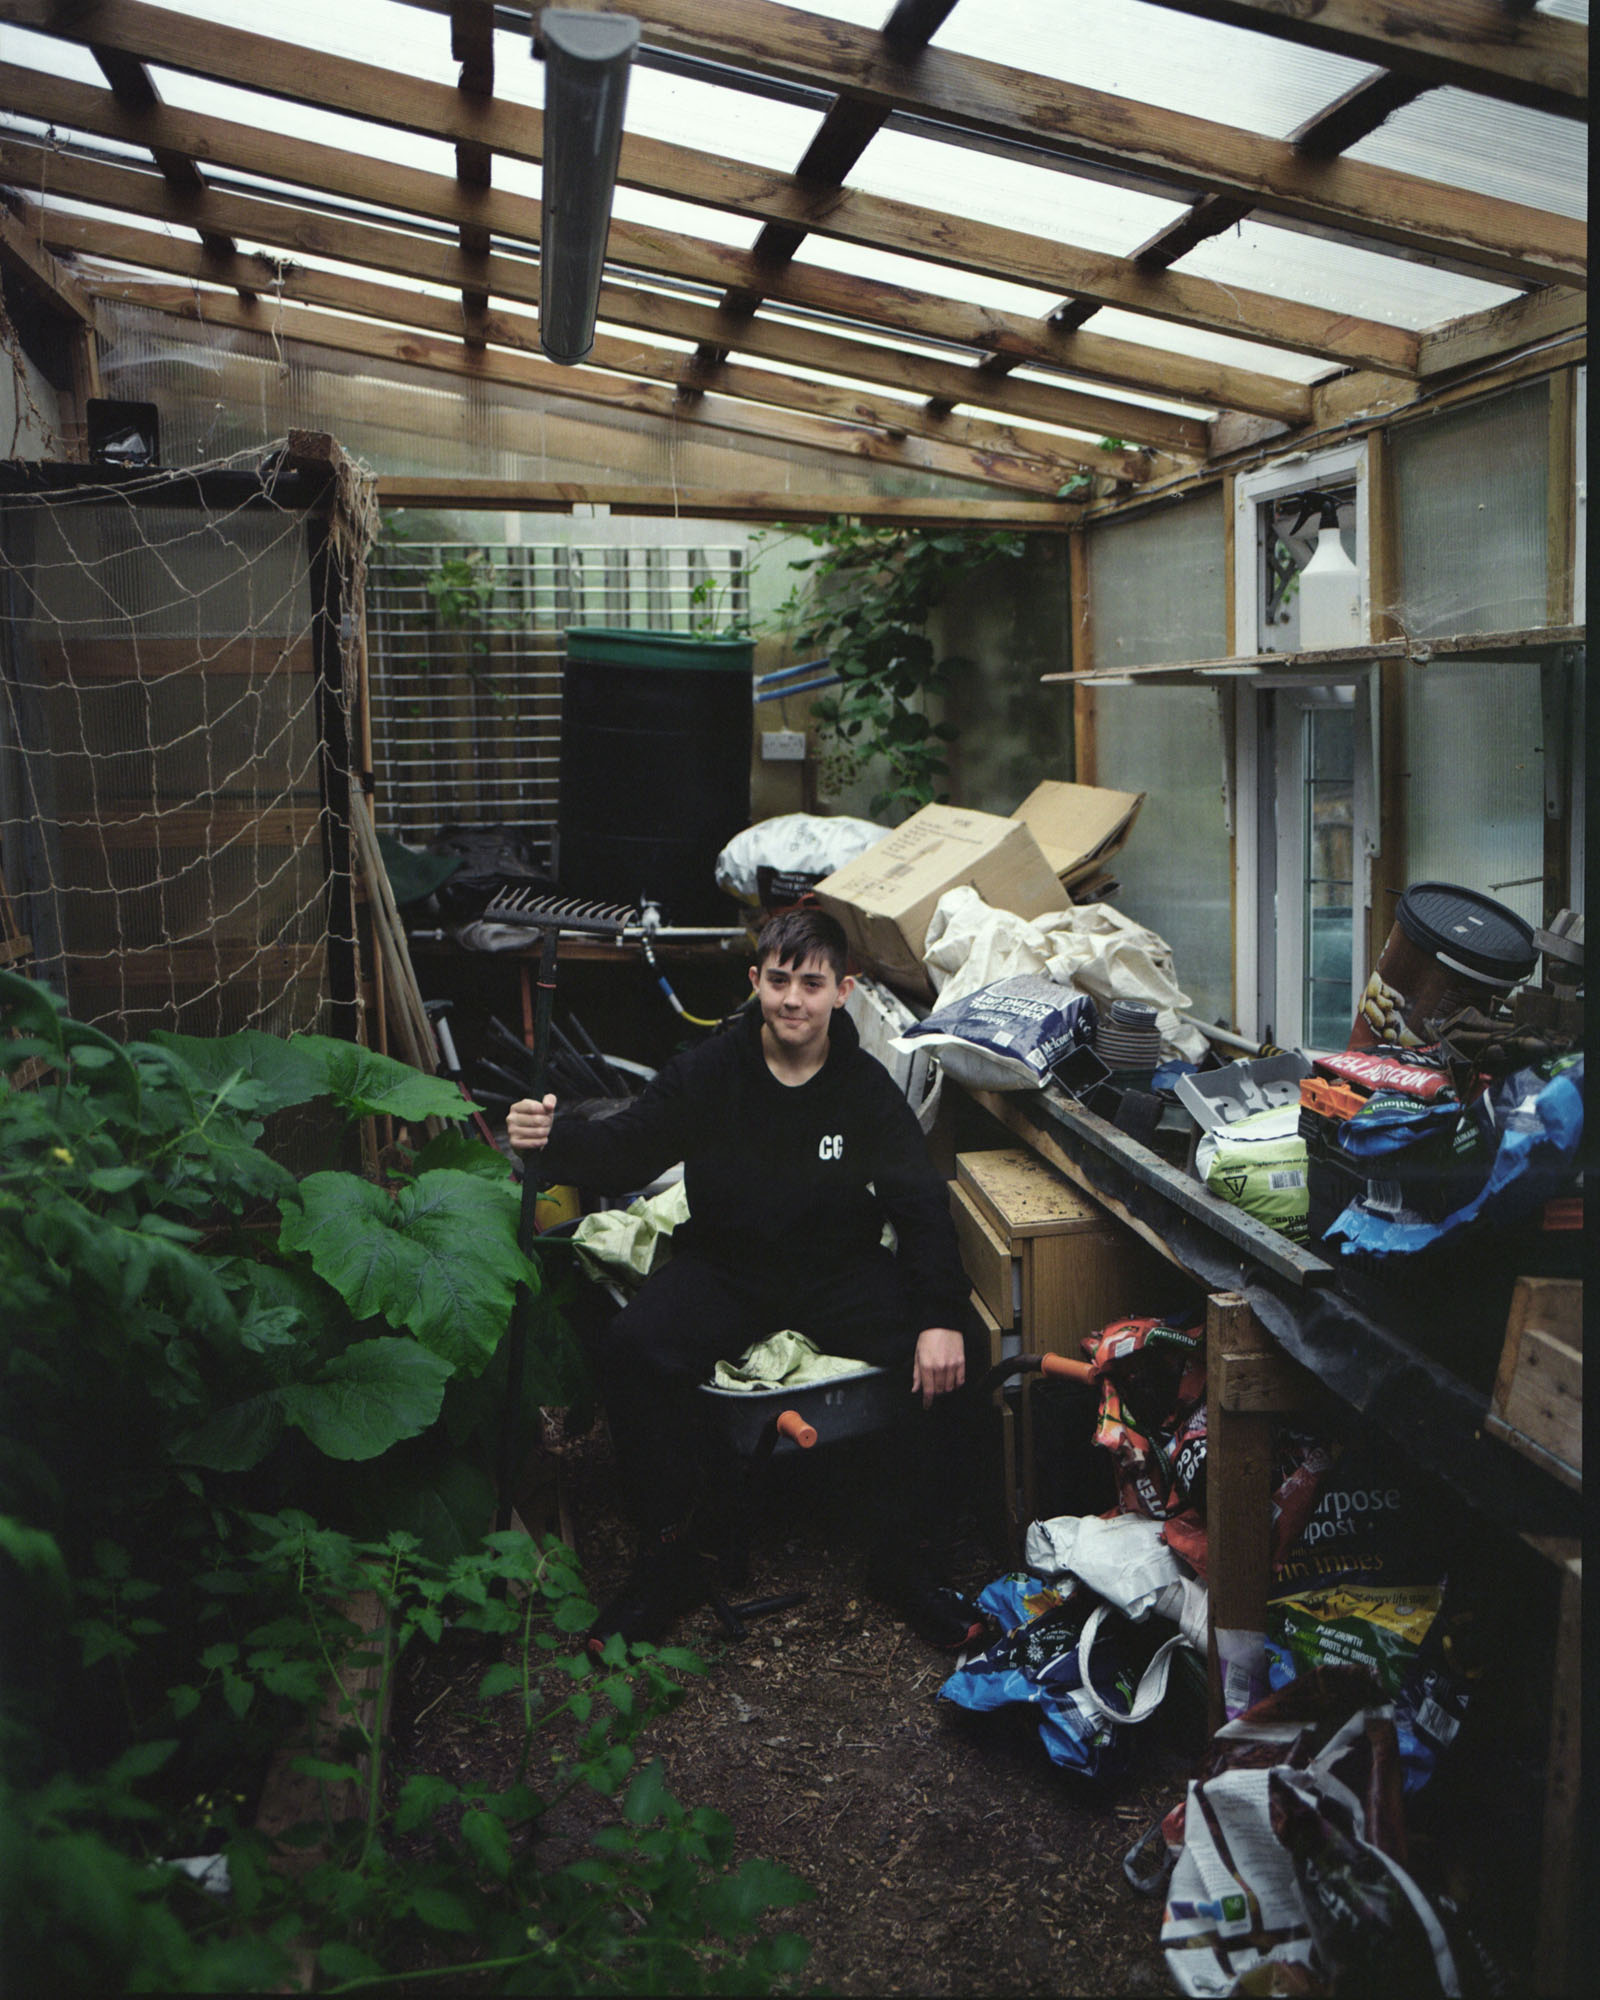 Boy sits in a greenhouse surrounded by plants, boxes and gardening tools.